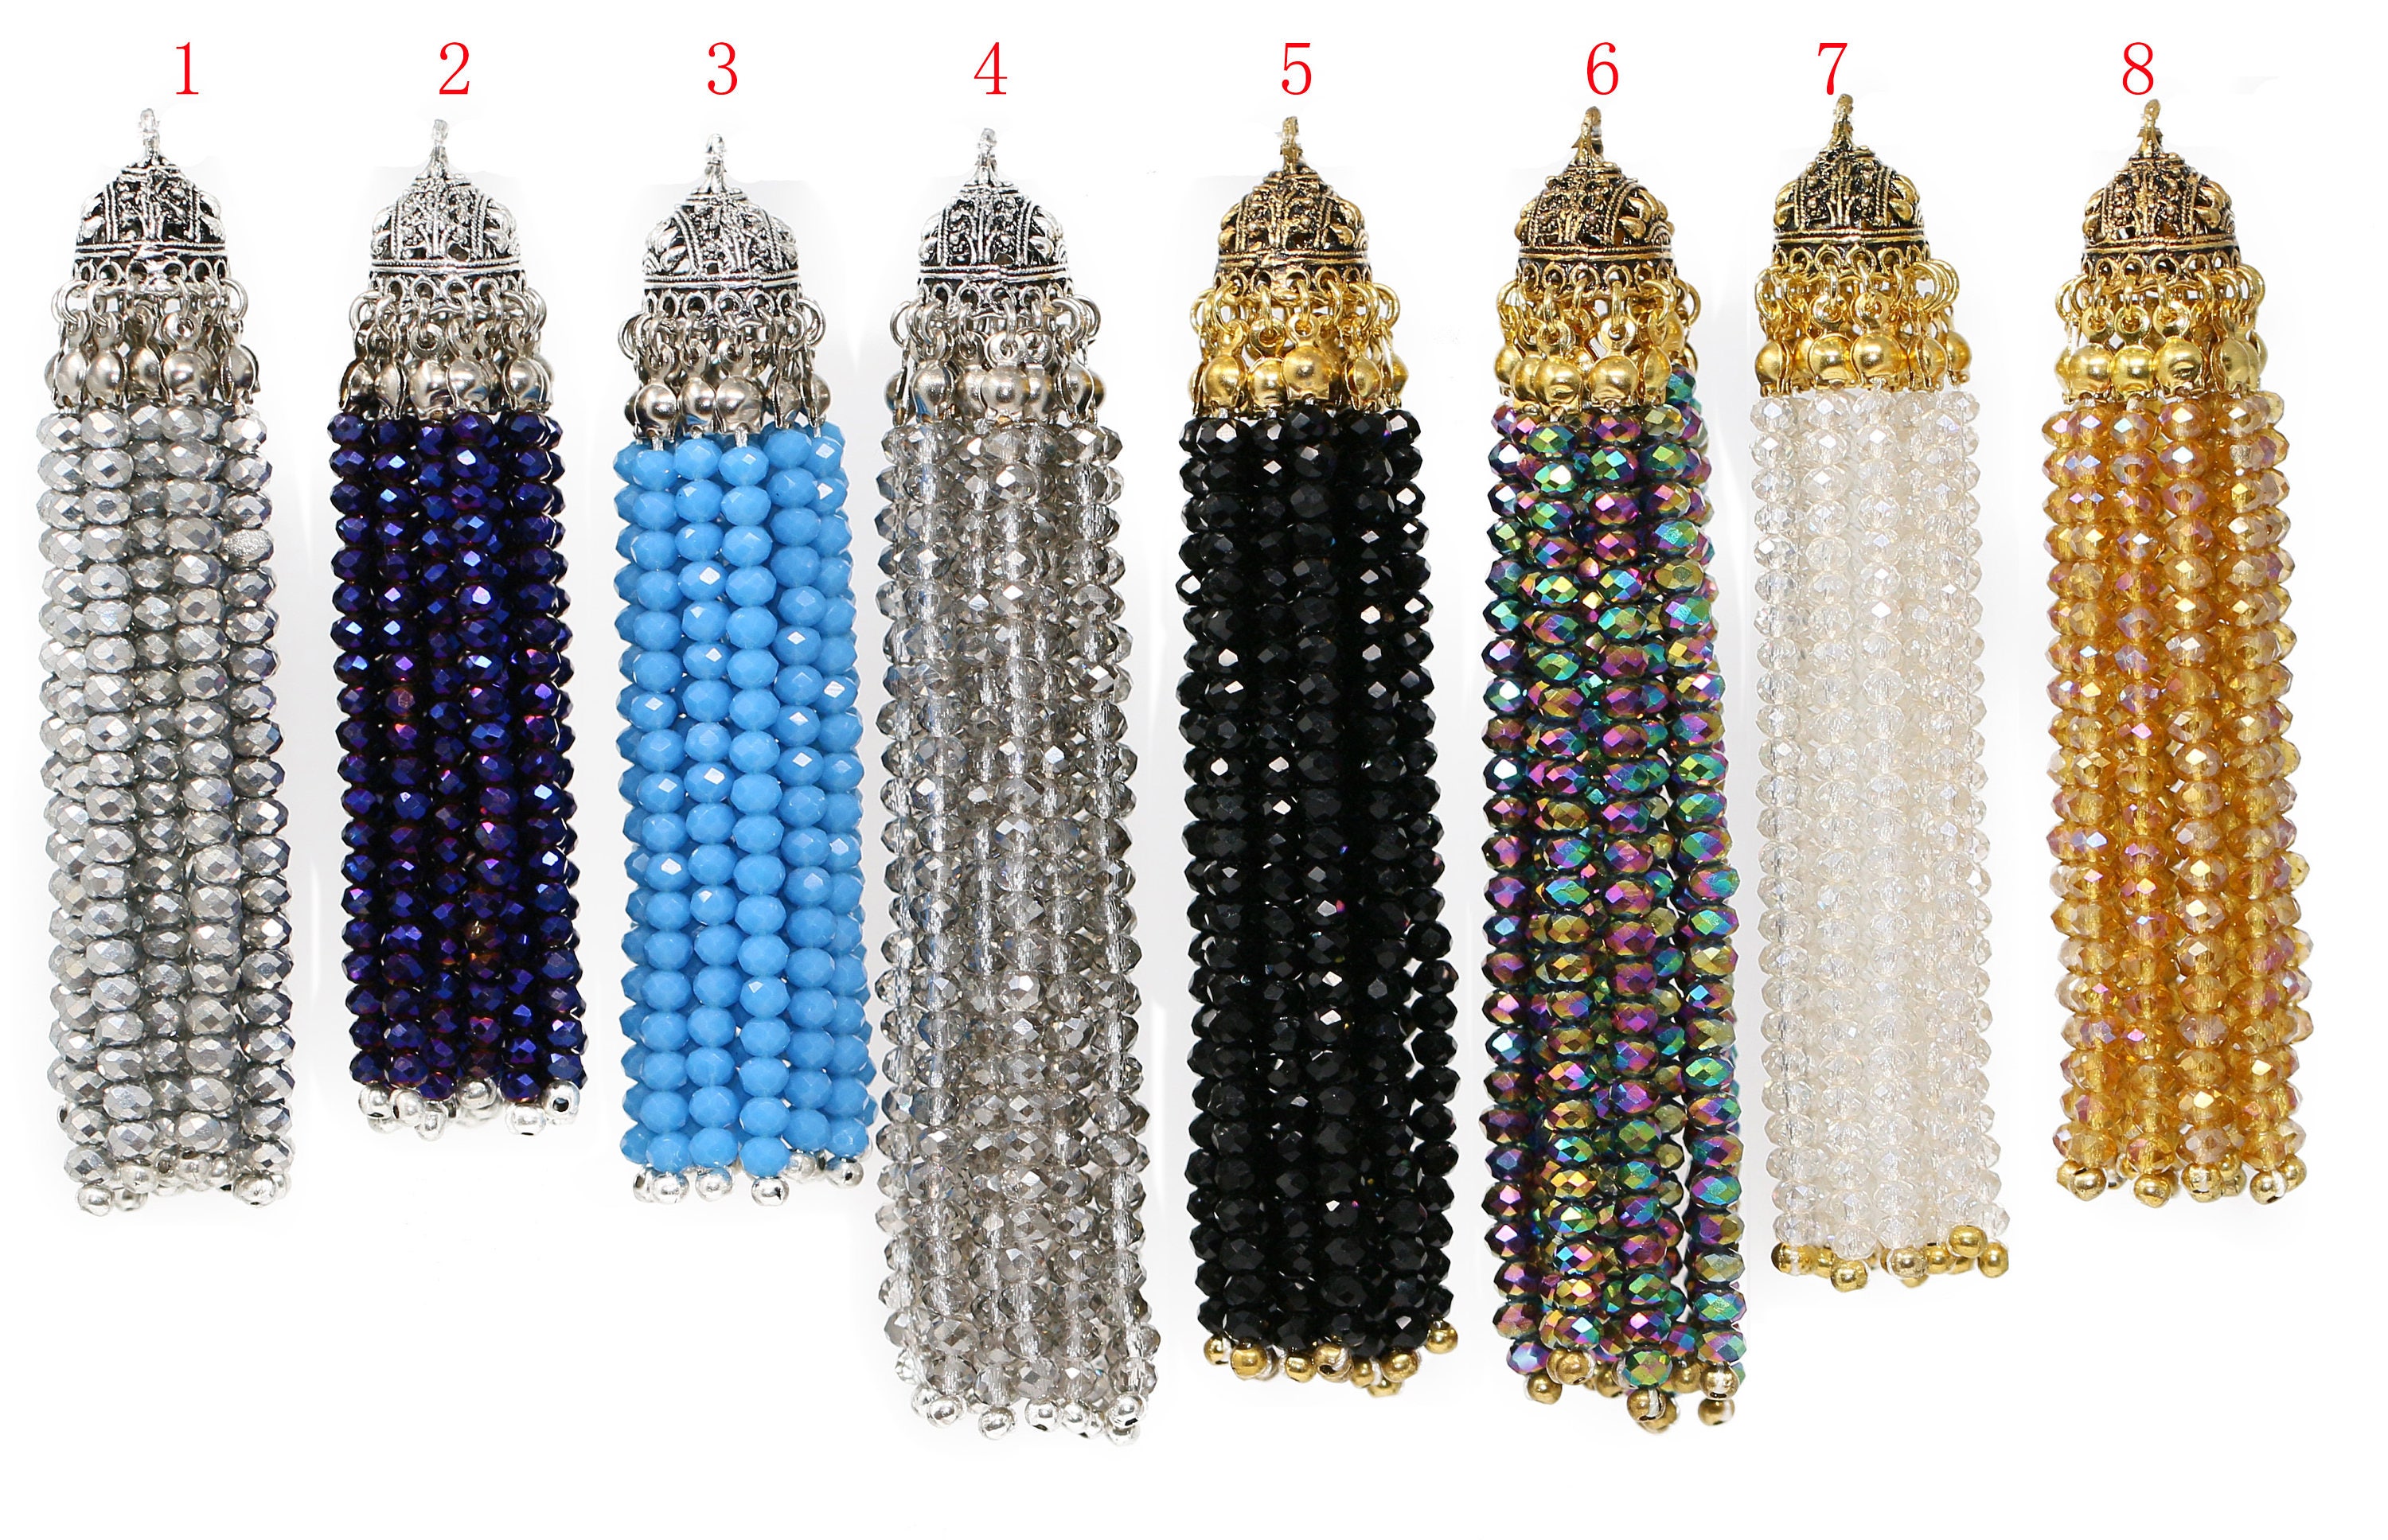 Beaded Tassels for Bags or Anything! * Moms and Crafters